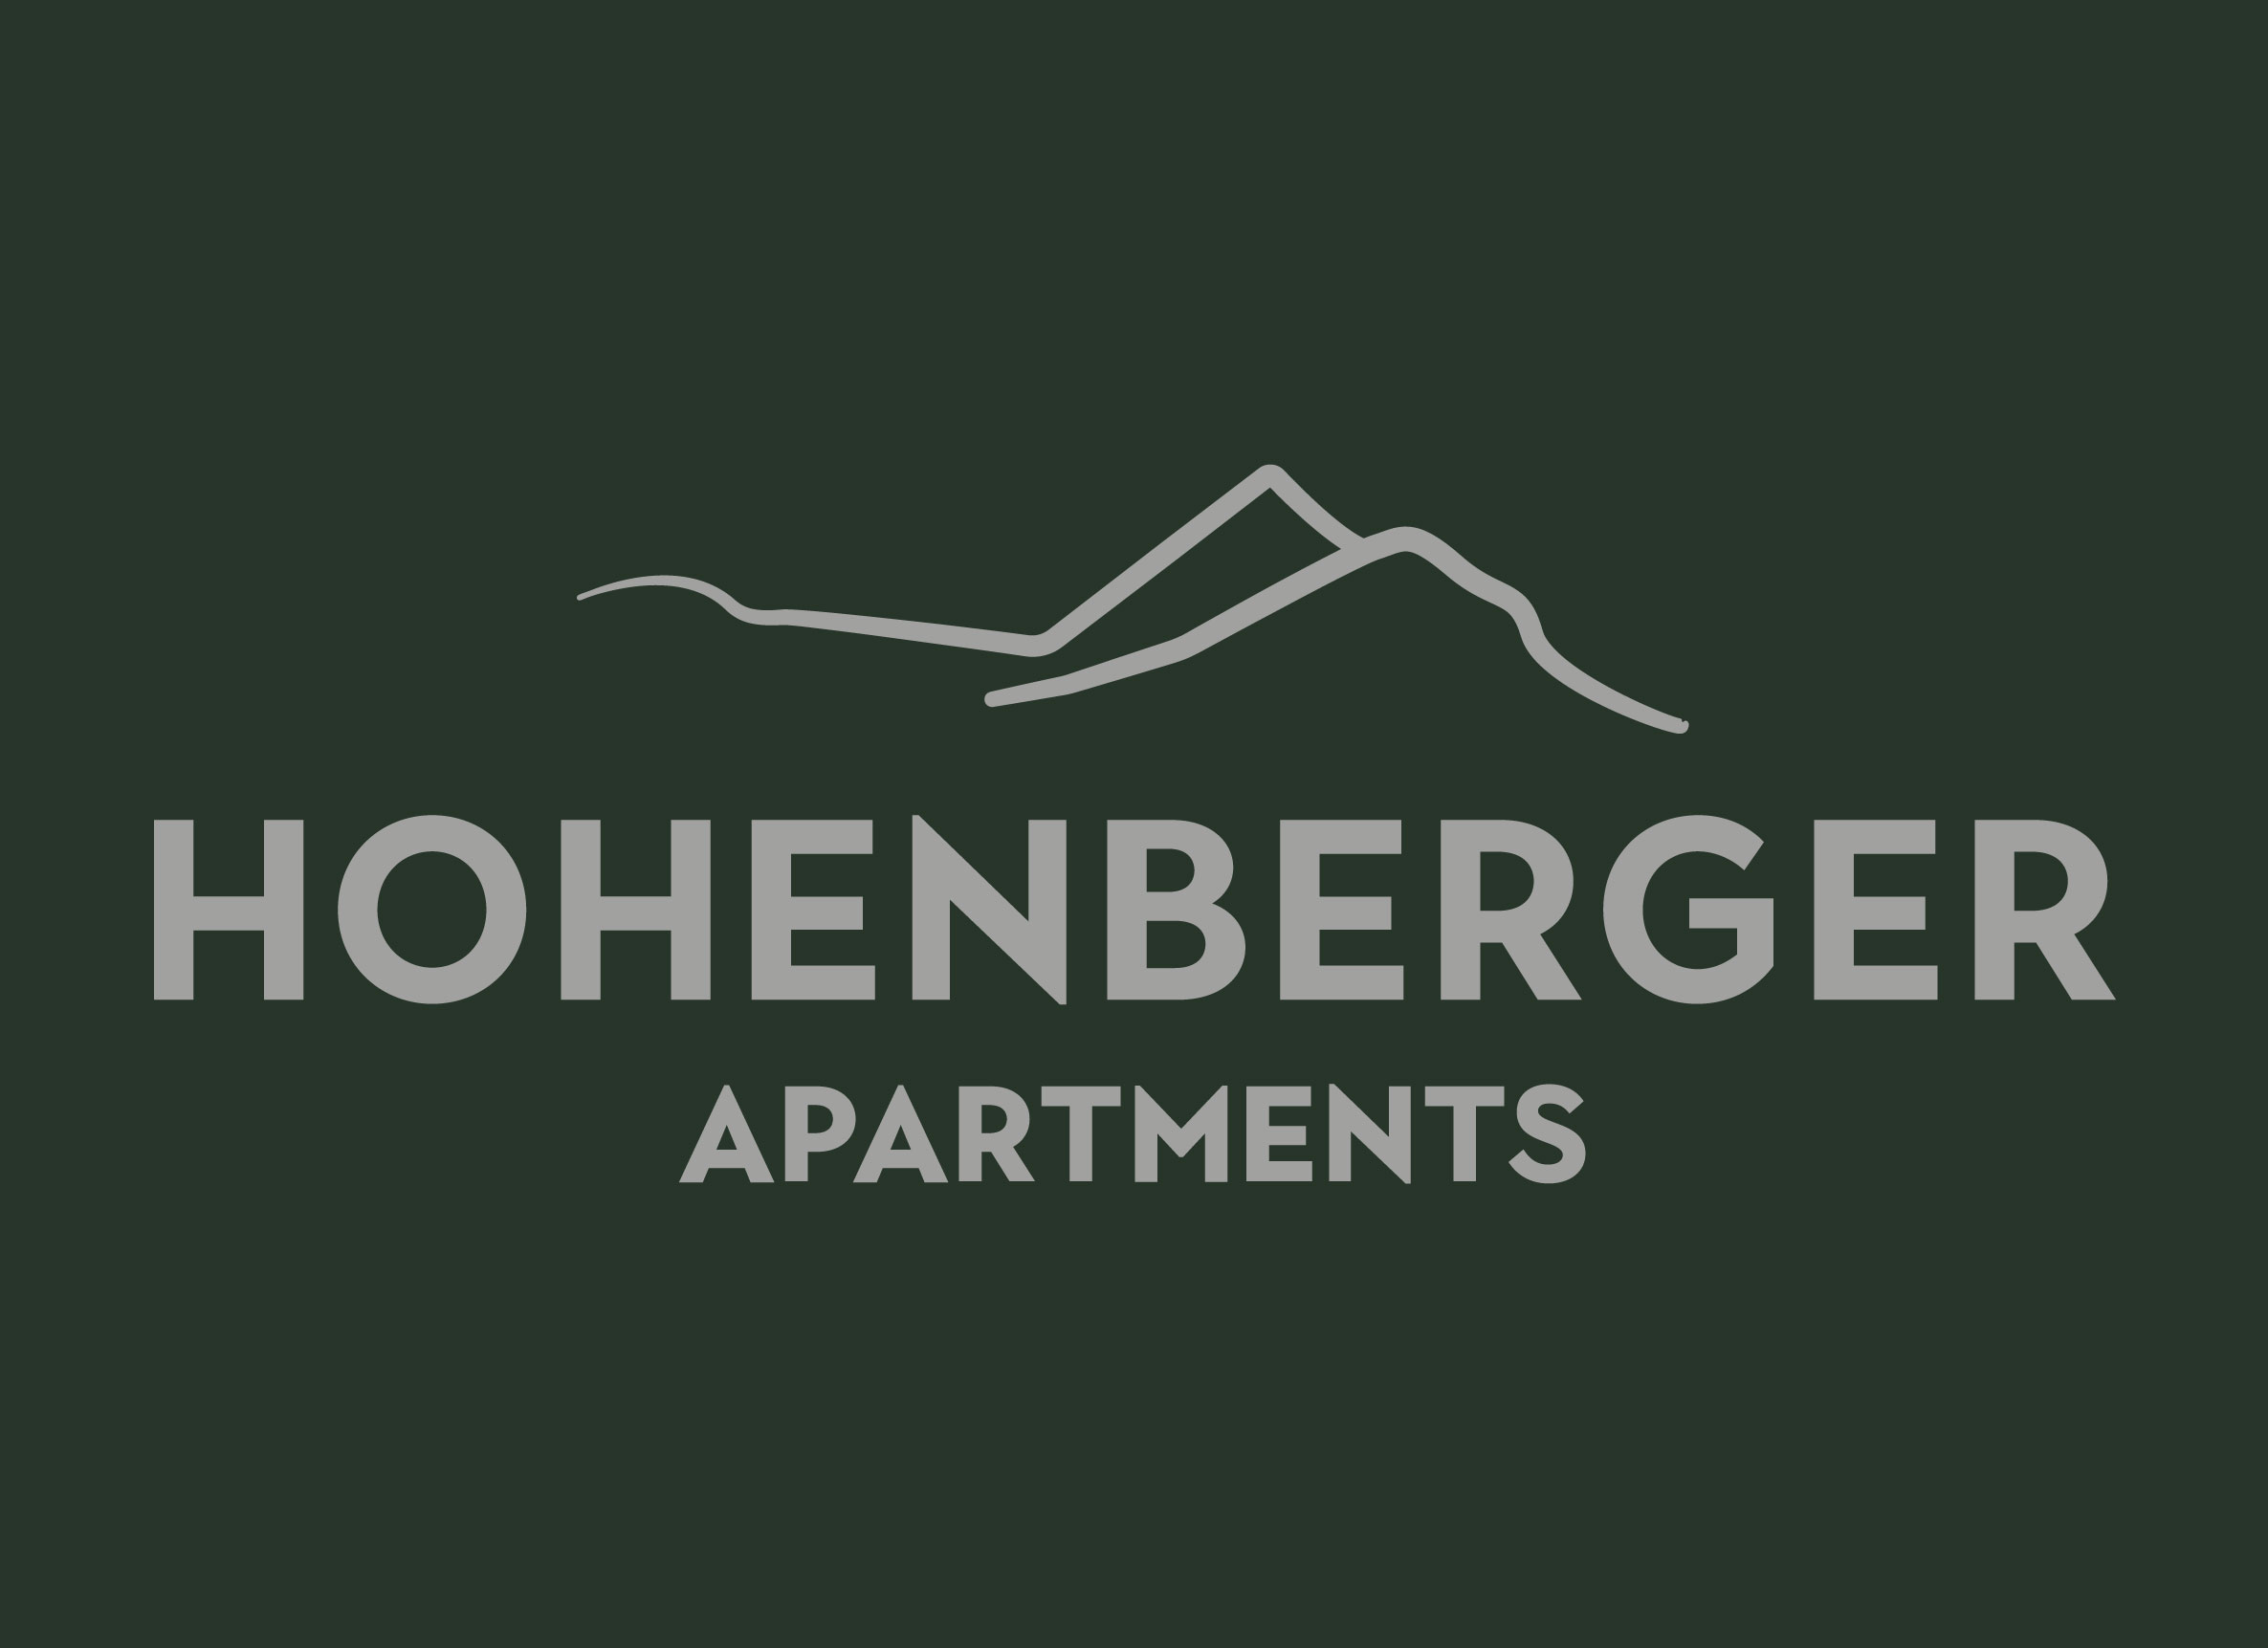 Apartments Hohenberger has an interesting offer for the holders of the Gopass Smart Season Pass